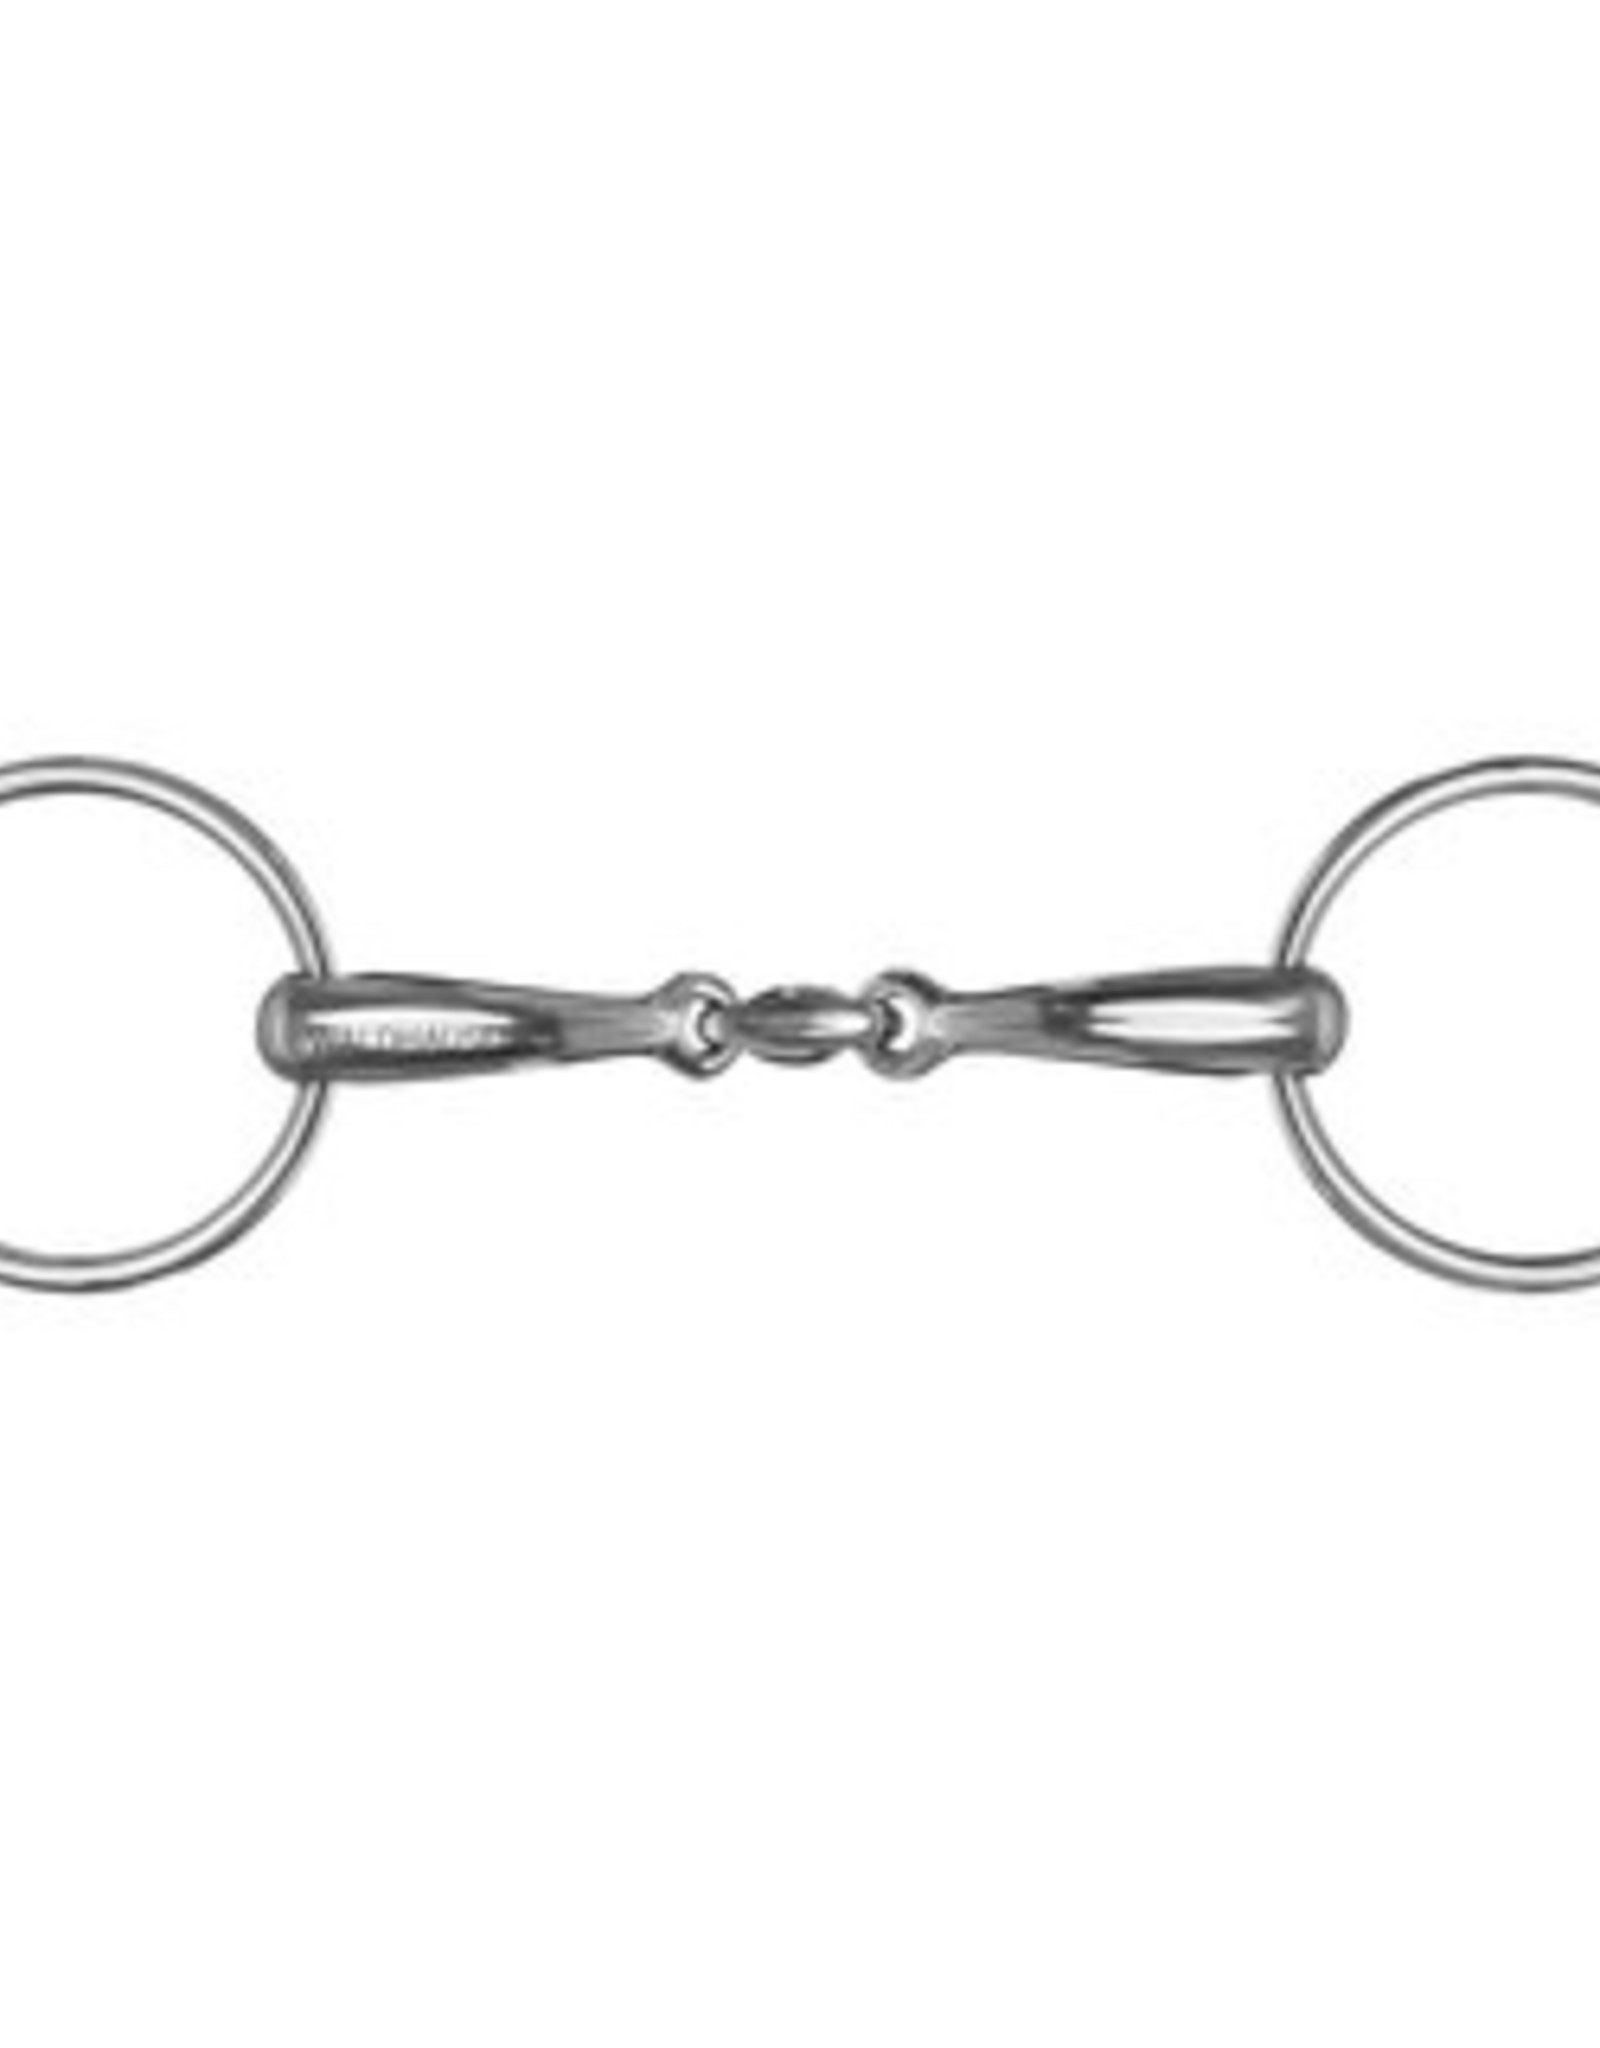 WALDHAUSEN ANATOMICAL LOOSE RING SNAFFLE WITH OVAL LINK